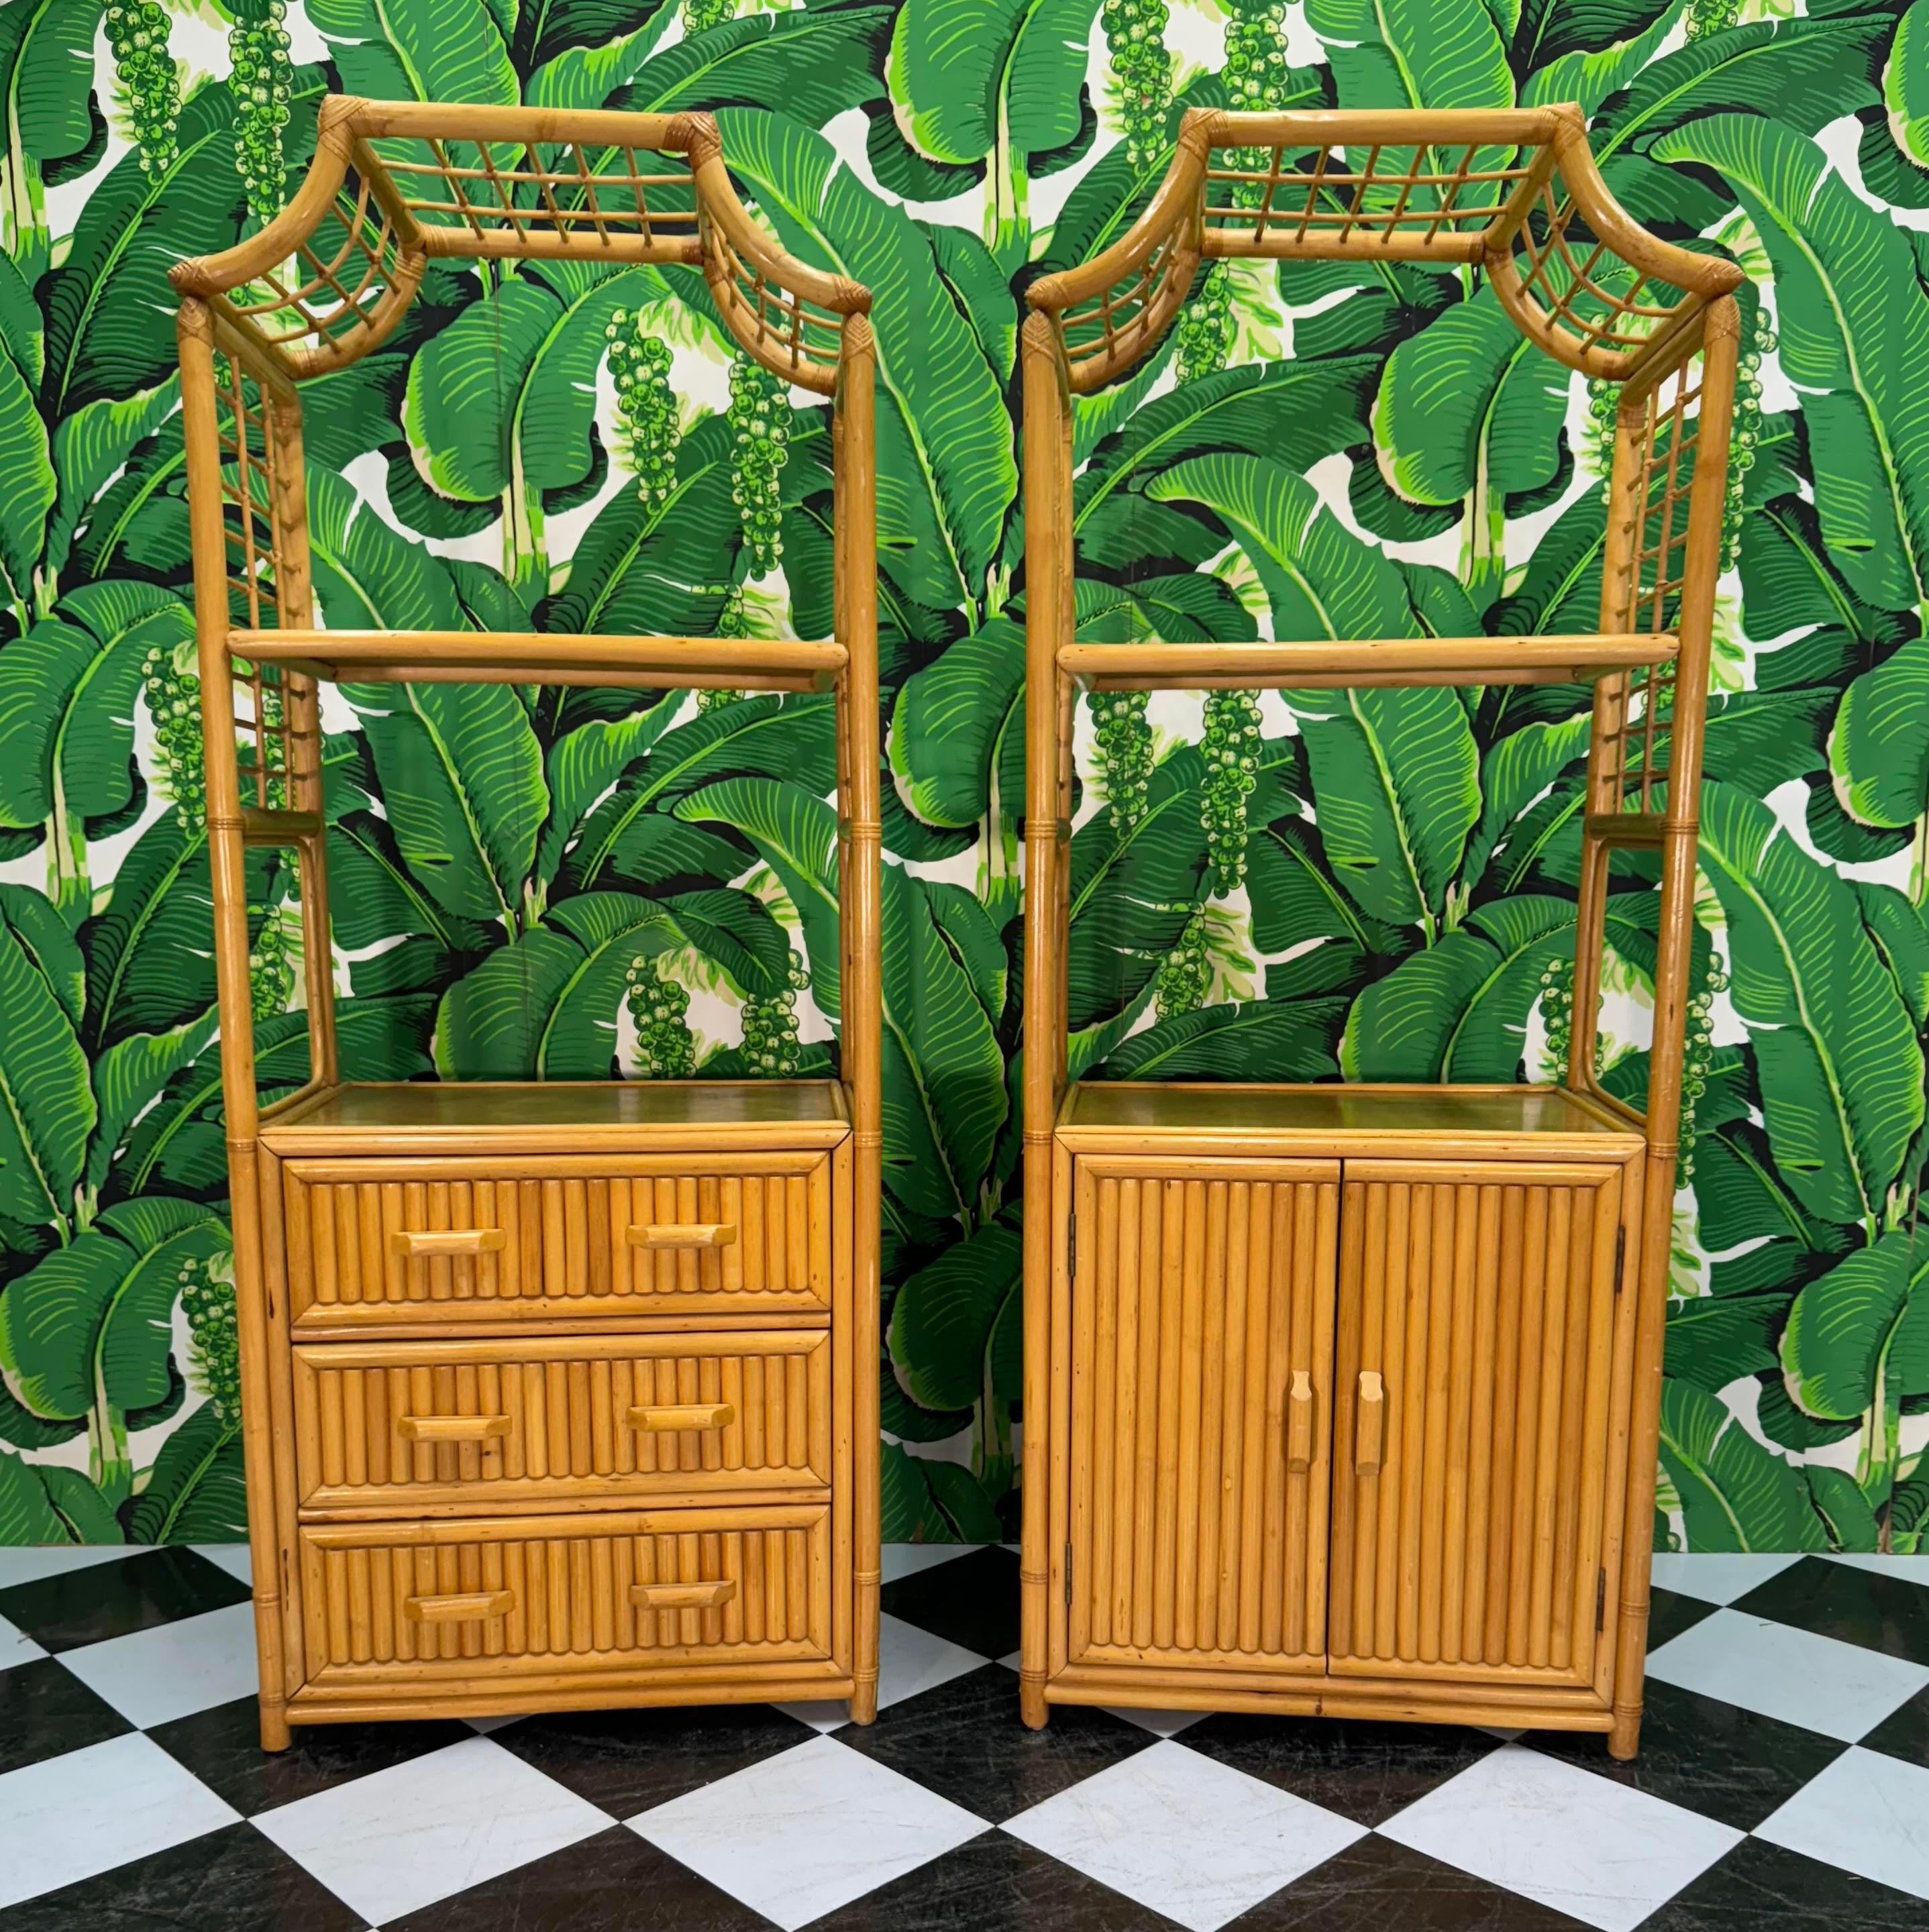 Pair of rattan etageres feature a chinoiserie pagoda form and rattan fretwork. One with three drawers and one with double doors revealing shelved storage. Good condition with minor imperfections consistent with age, see photos for condition details.